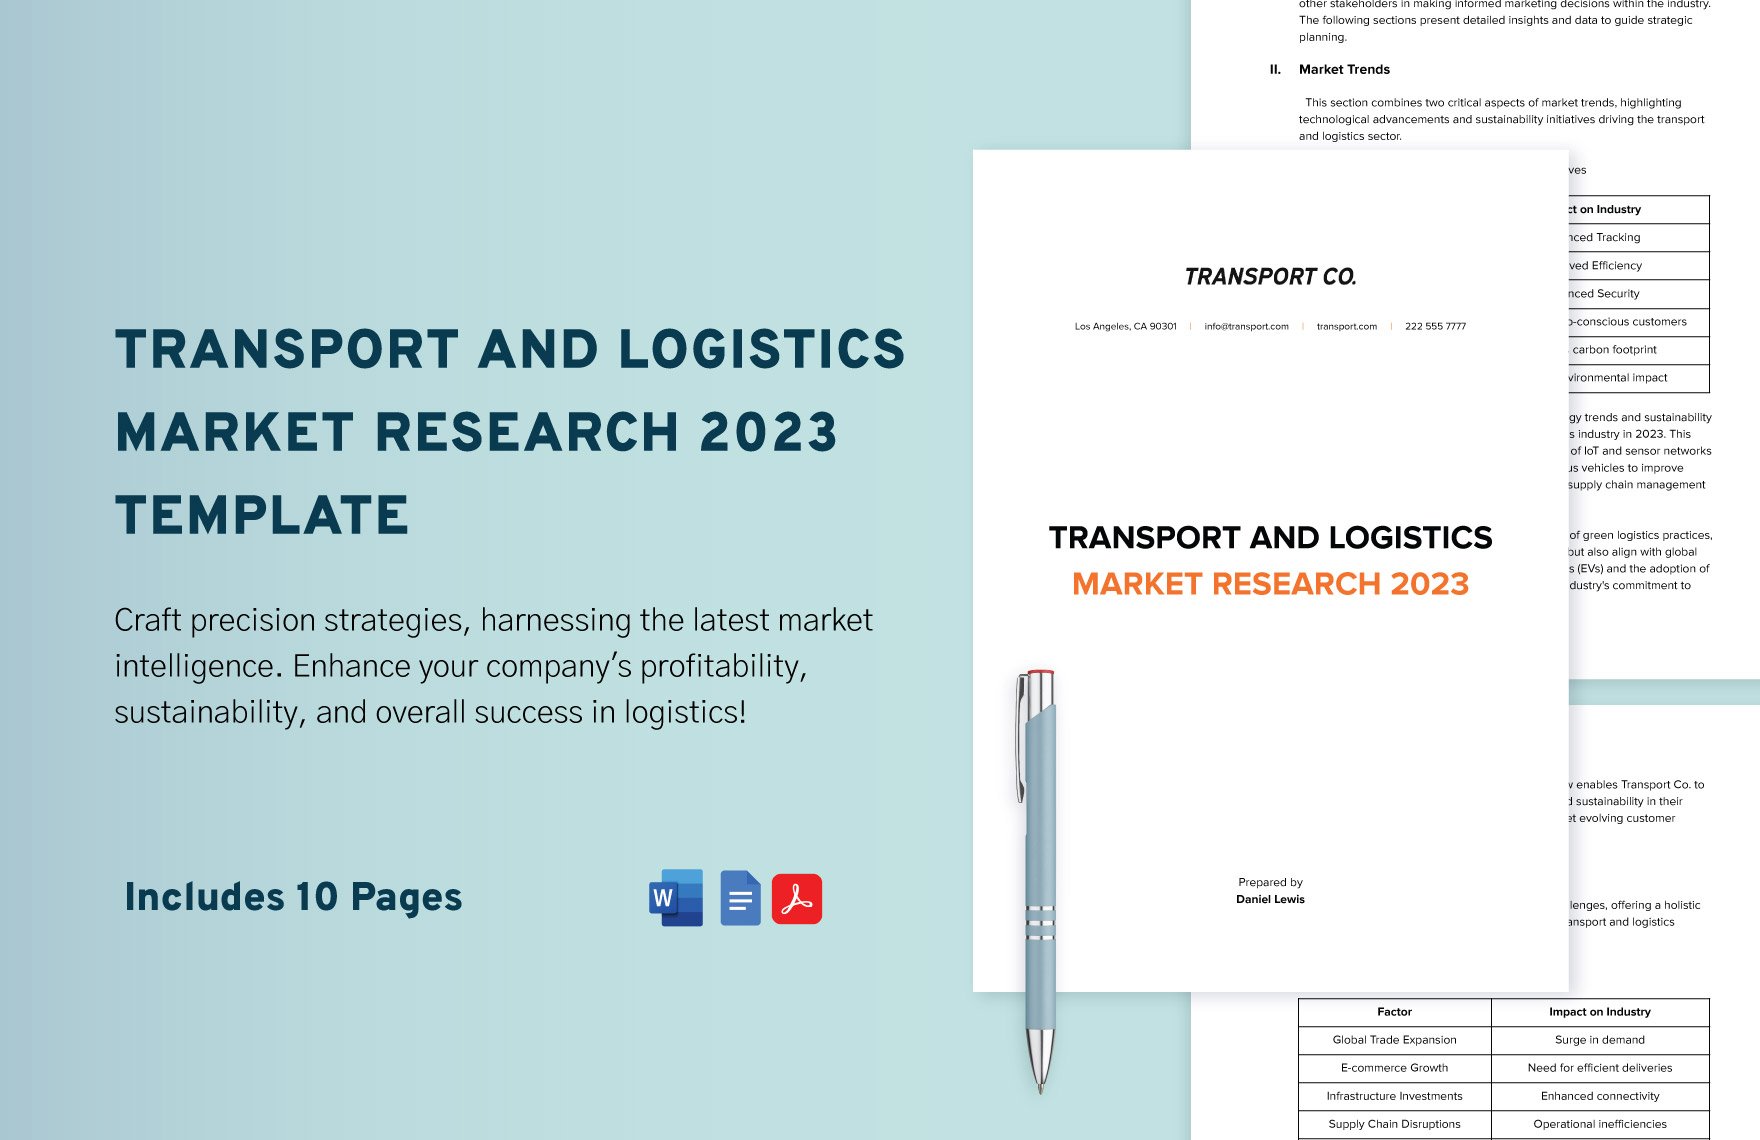 Transport and Logistics Market Research 2023 Template in Word, Google Docs, PDF